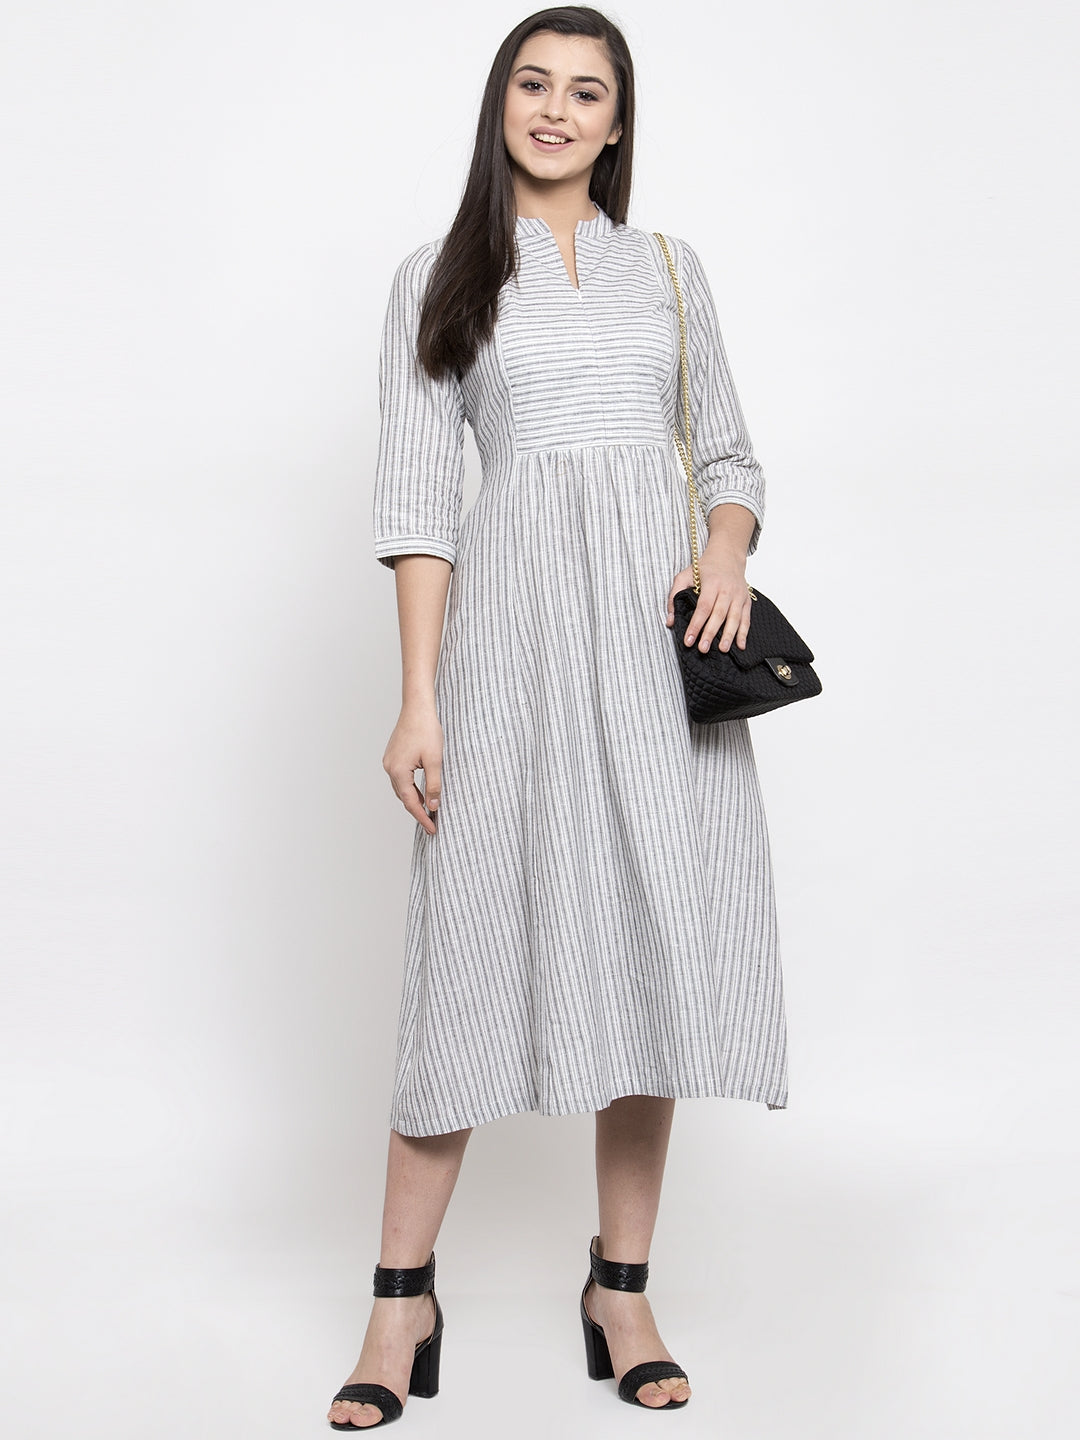 Ayaany Women White Long Fit Flared Dress